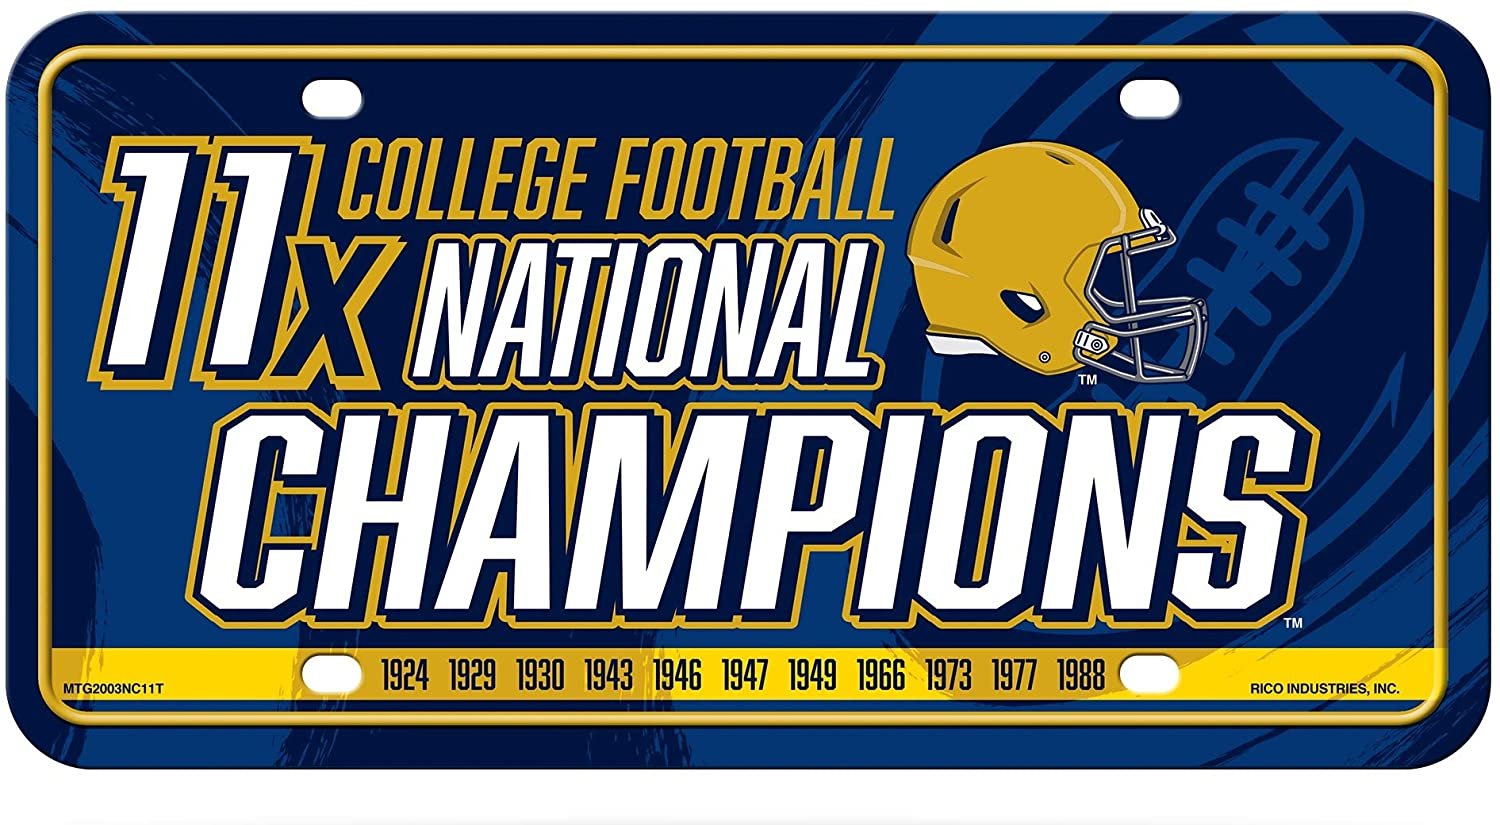 University of Notre Dame Fighting Irish Metal Auto Tag License Plate, 11-Time Champions, 6x12 Inch